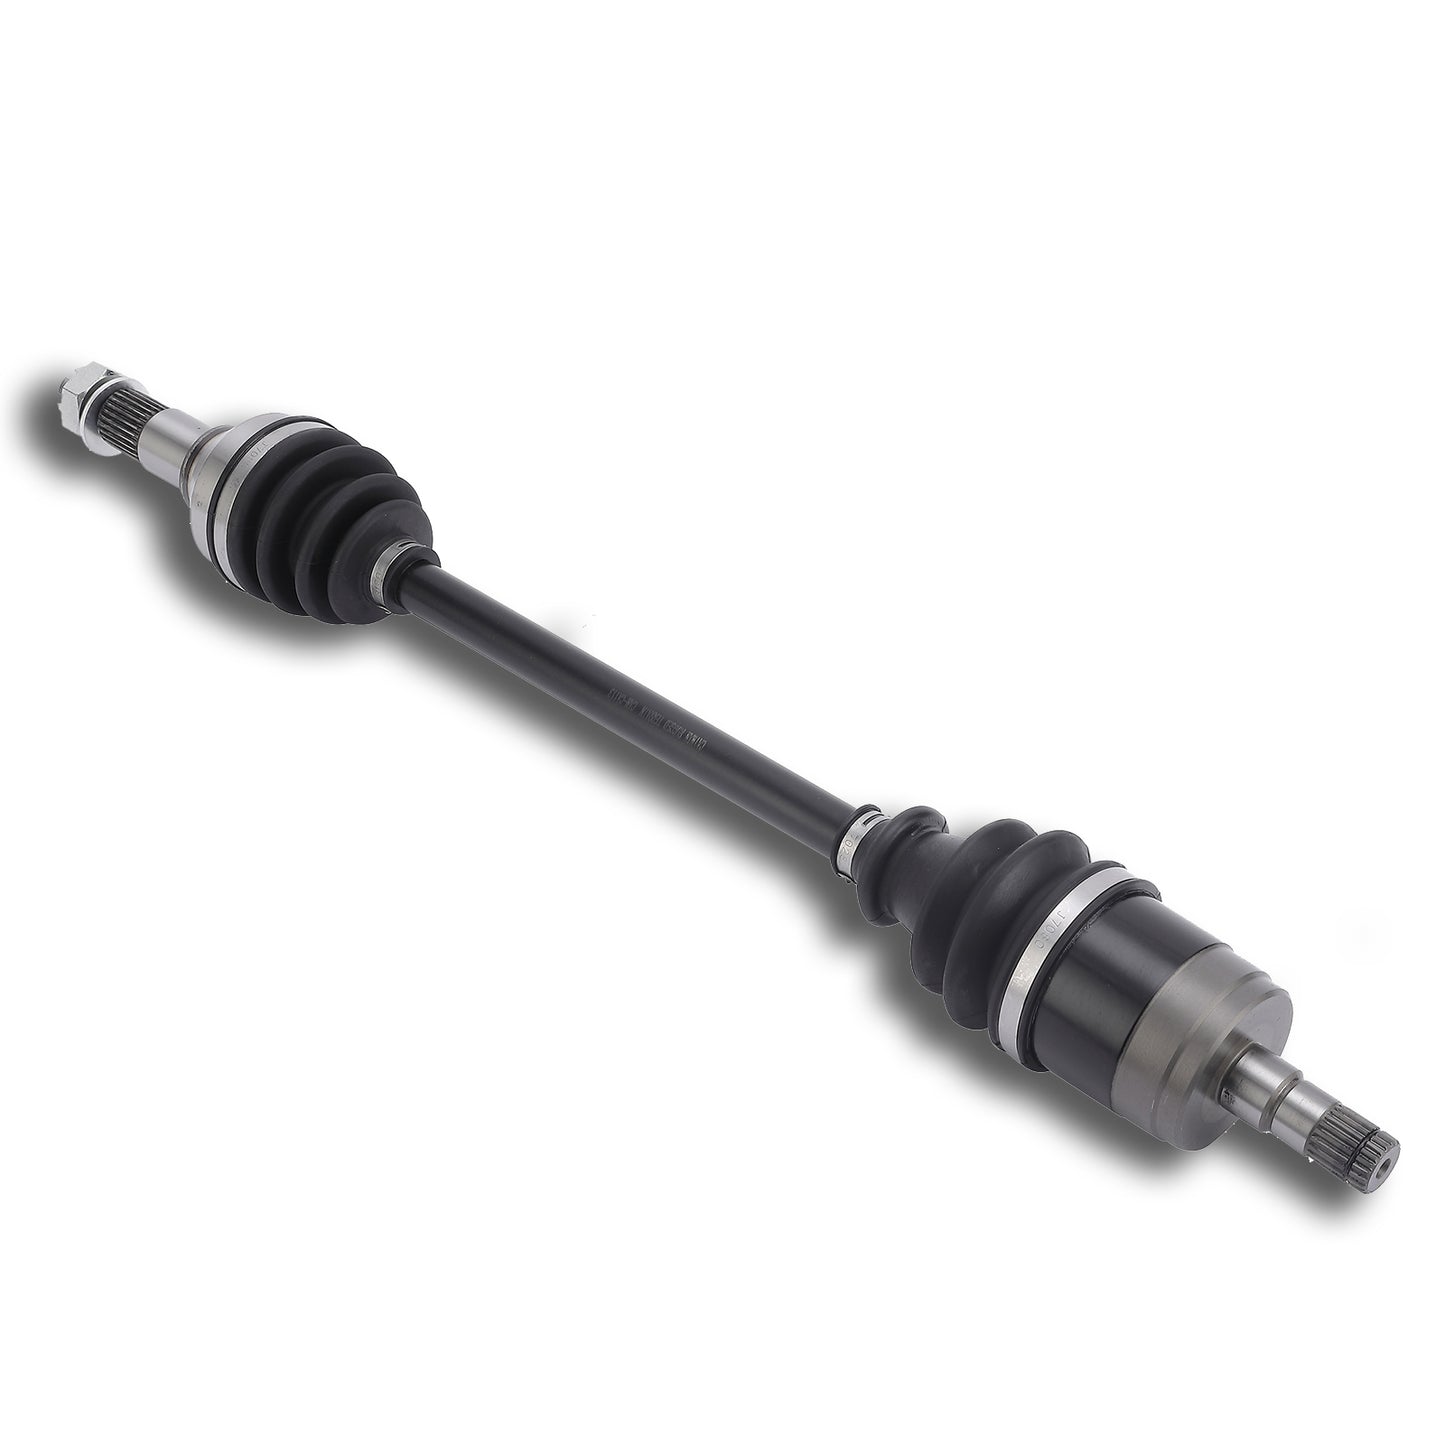 1 CAM-CA113 and 1 CAM-CA-213 Front Left Drive Shaft CV Axle Compatible with CAN AM (2017-2020) Commander 800, 1000 LF 705400953,705401105,705401871